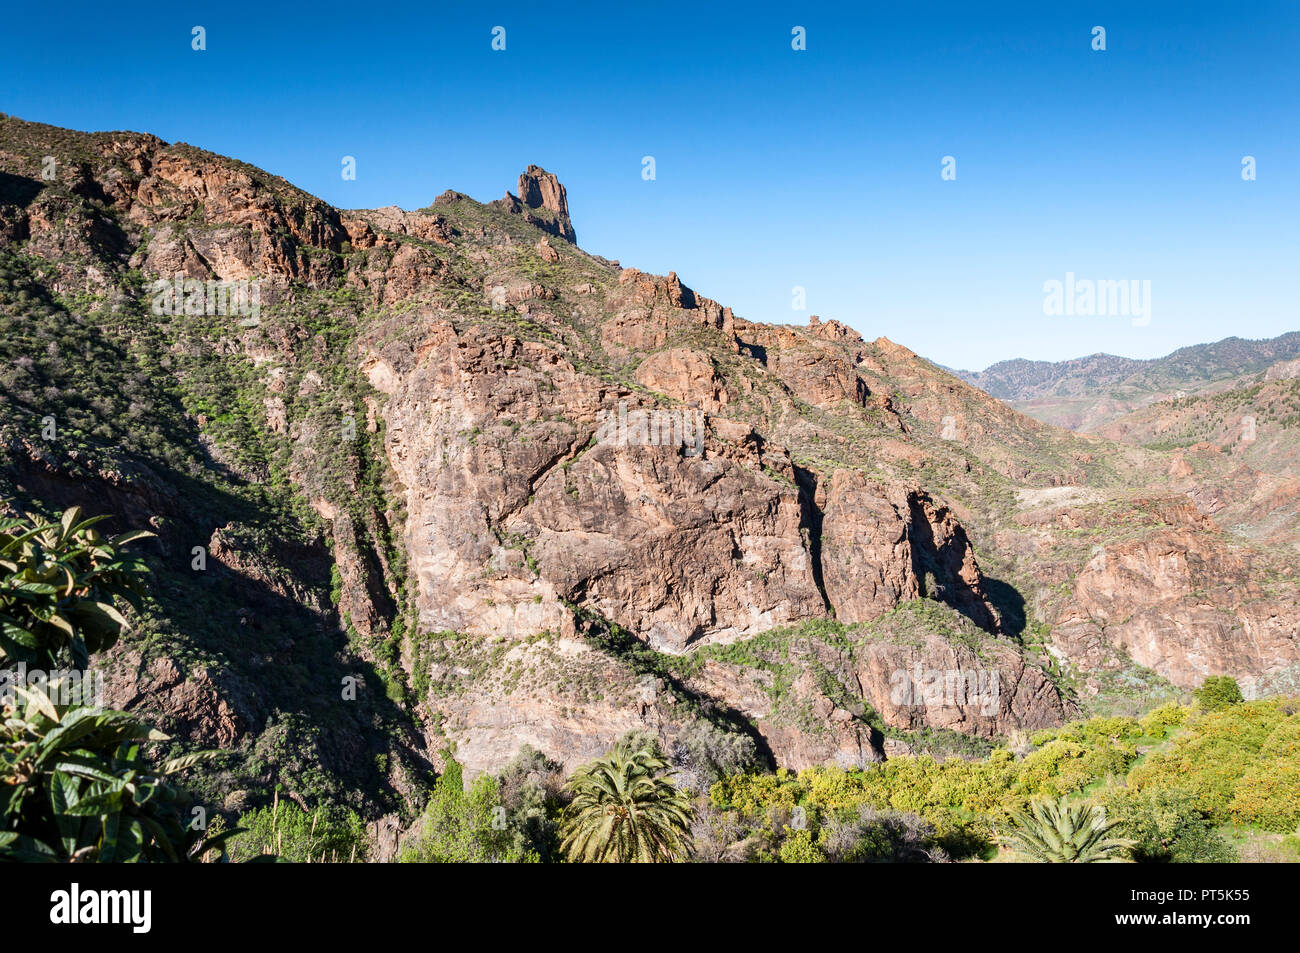 Mountainous landscape in the interior of the Gran Canaria Island, Canary Islands, Spain. Photo taken from de town of Tejeda Stock Photo